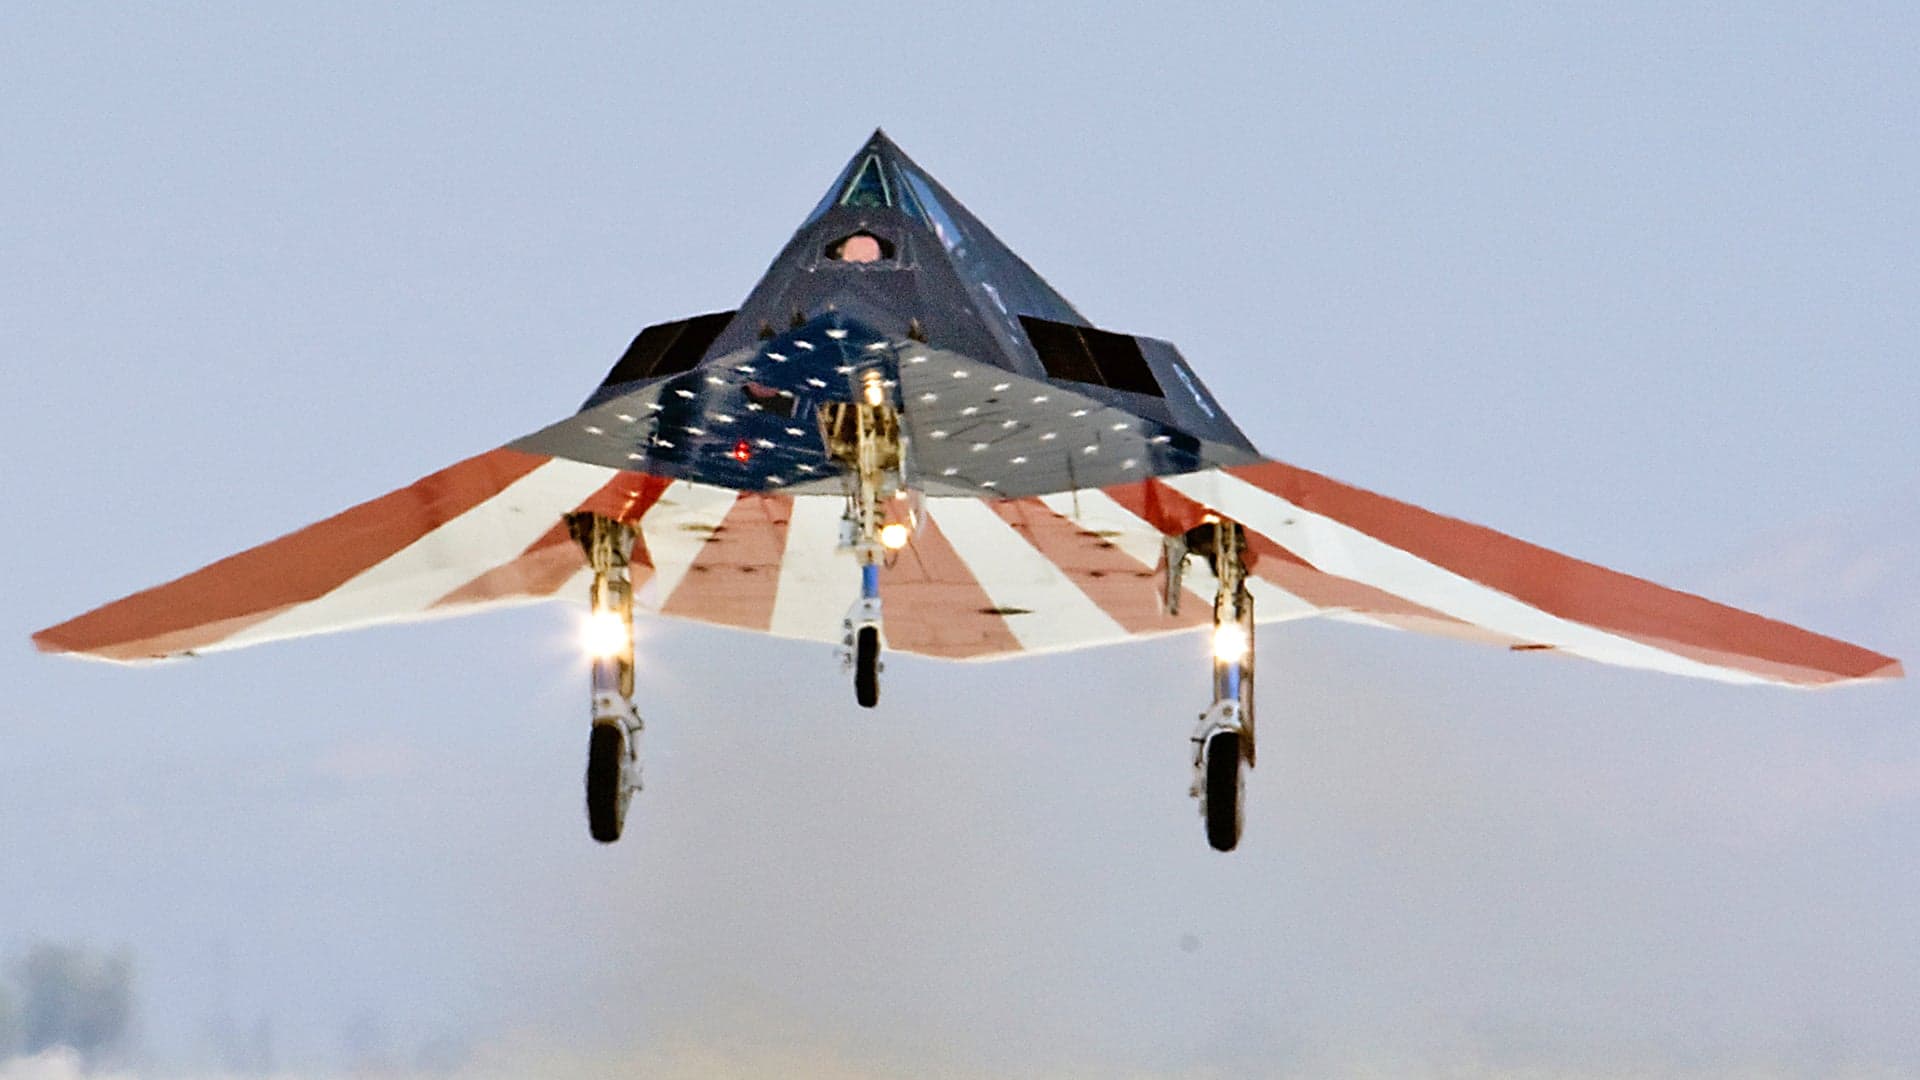 No, The F-117 Never Had Air-To-Air Capability, But One Did Get A Radar